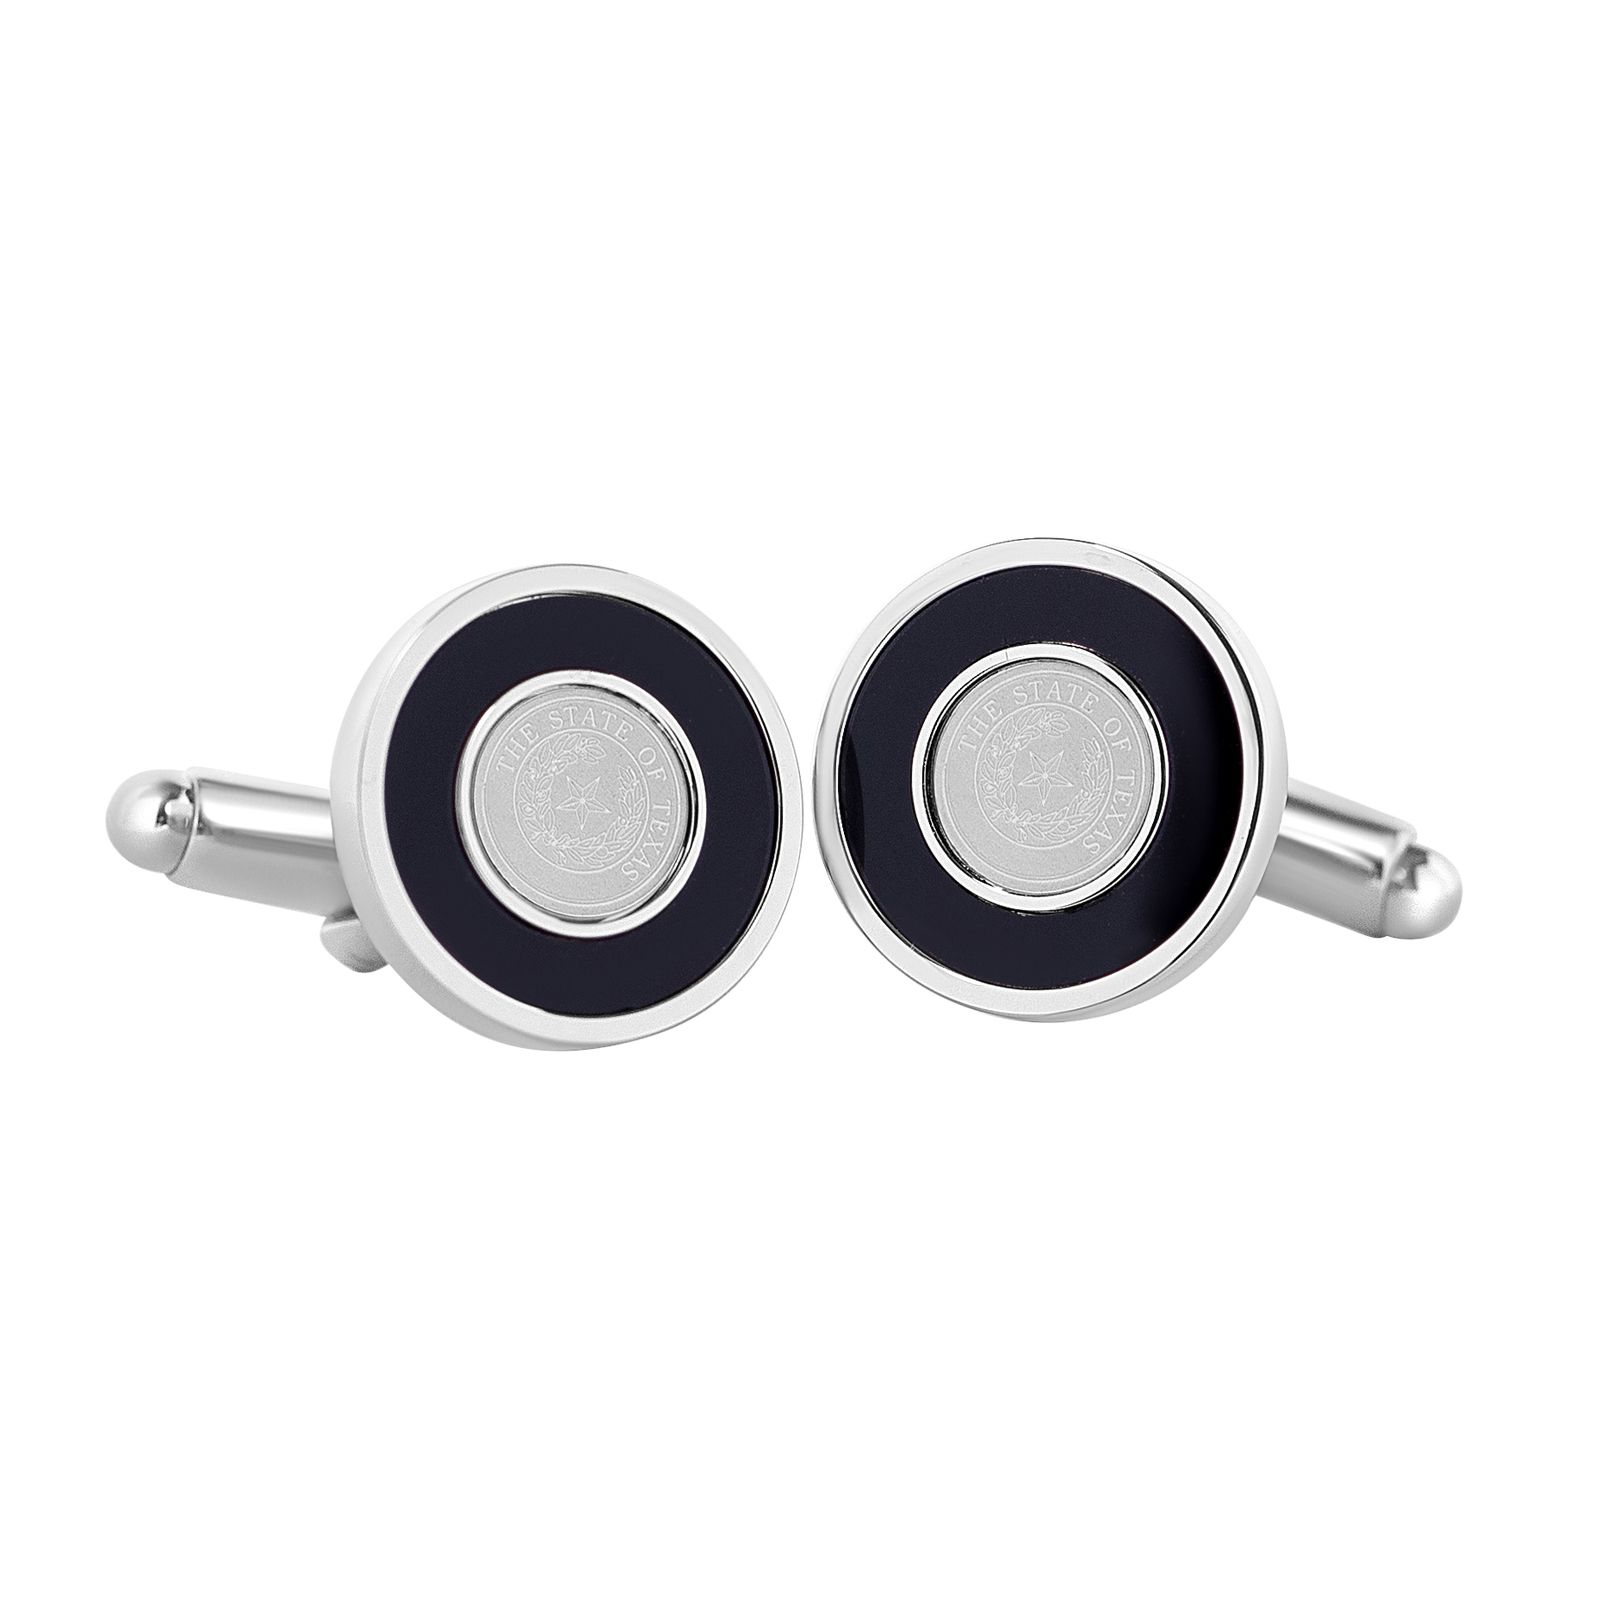 Texas State Seal Silver-Tone Cuff Links